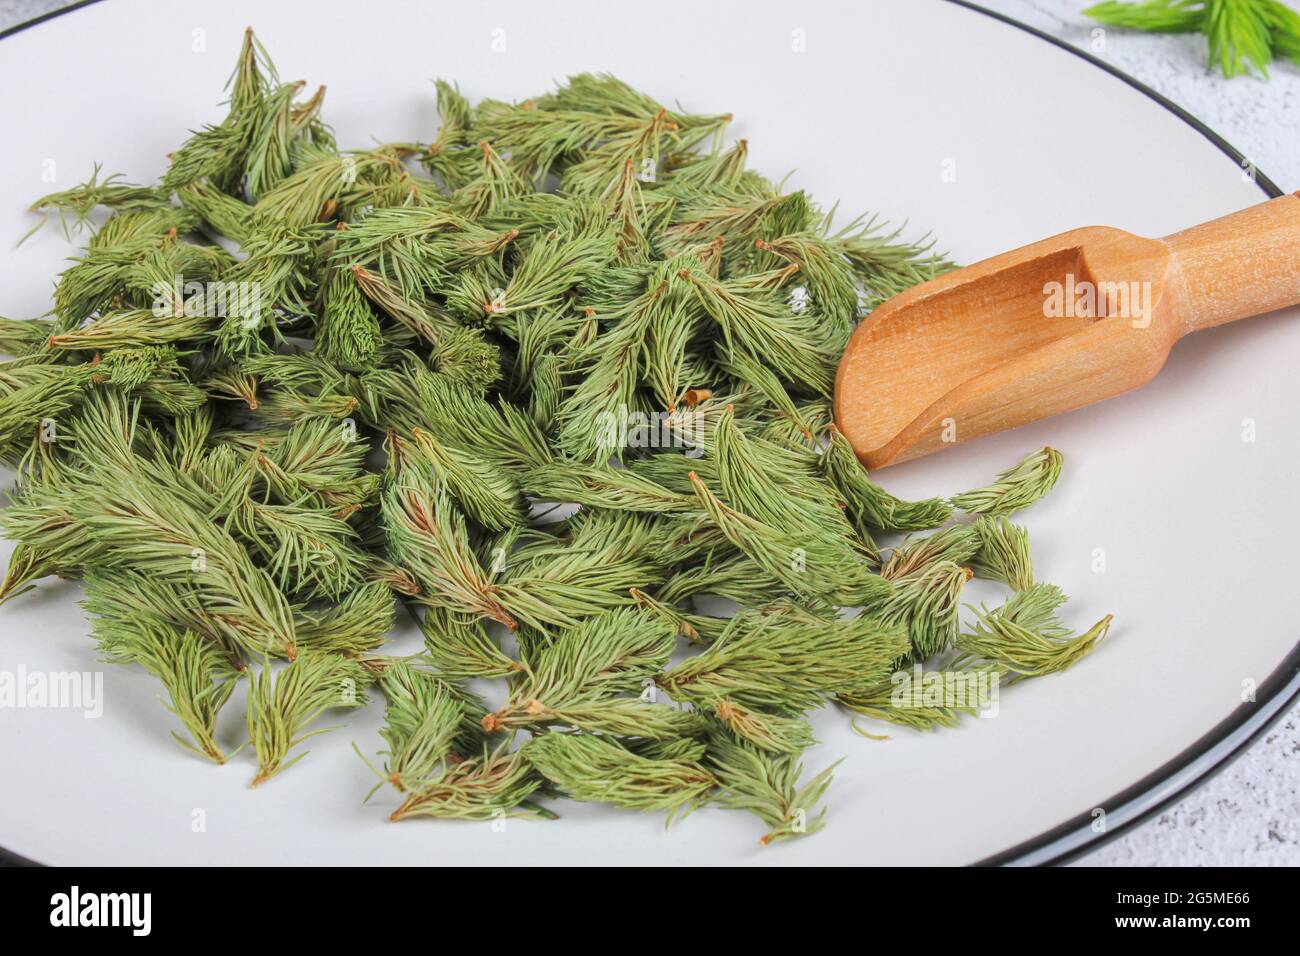 Dried young shoots of spruce prepare for tea. Remedy for cough and asthma. Homeopathy and natural folk medicine. Close up. Stock Photo